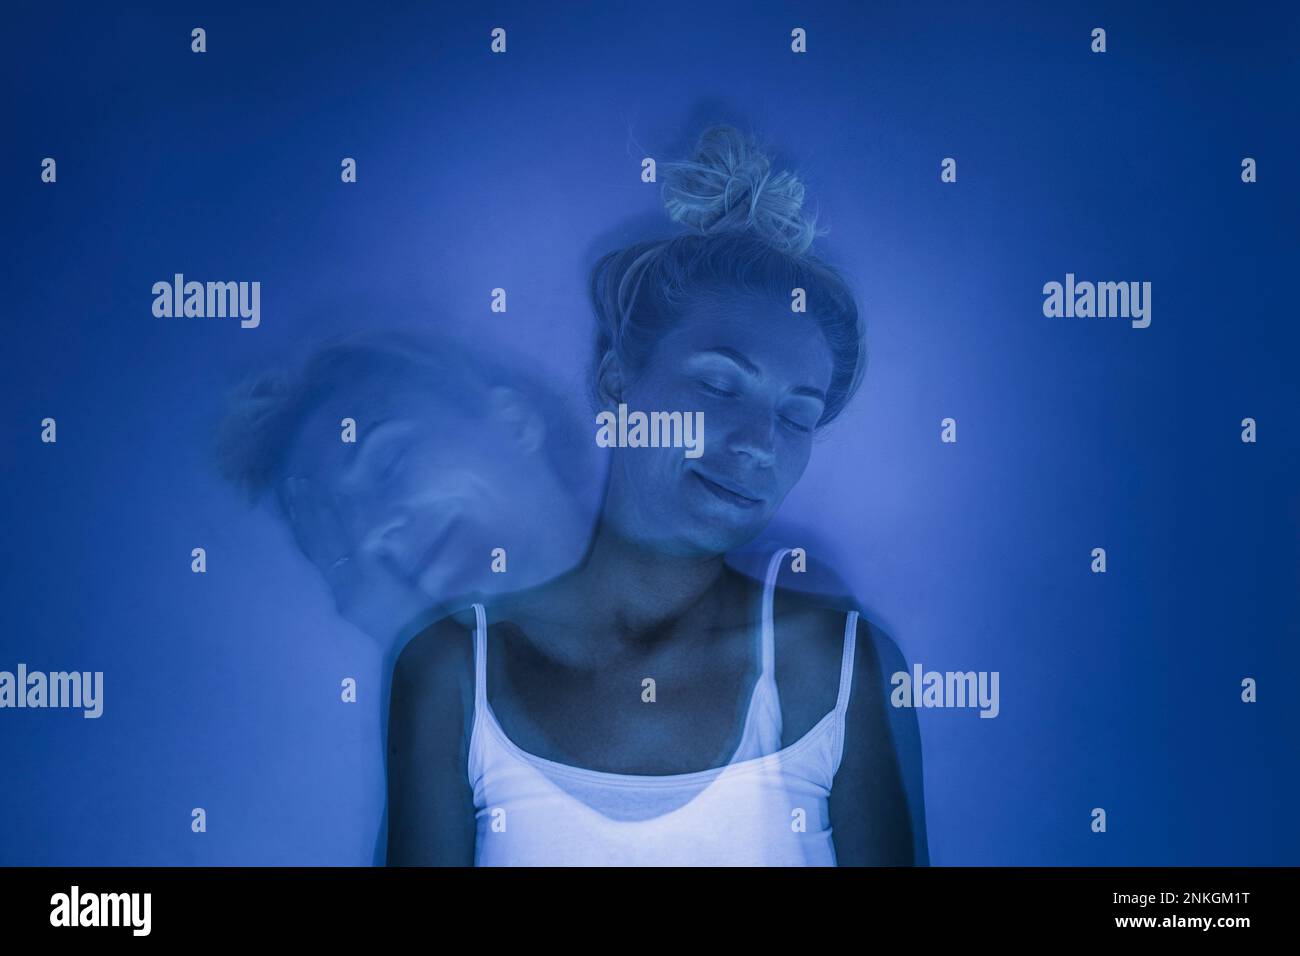 Smiling woman with eyes closed under UV light against blue background Stock Photo